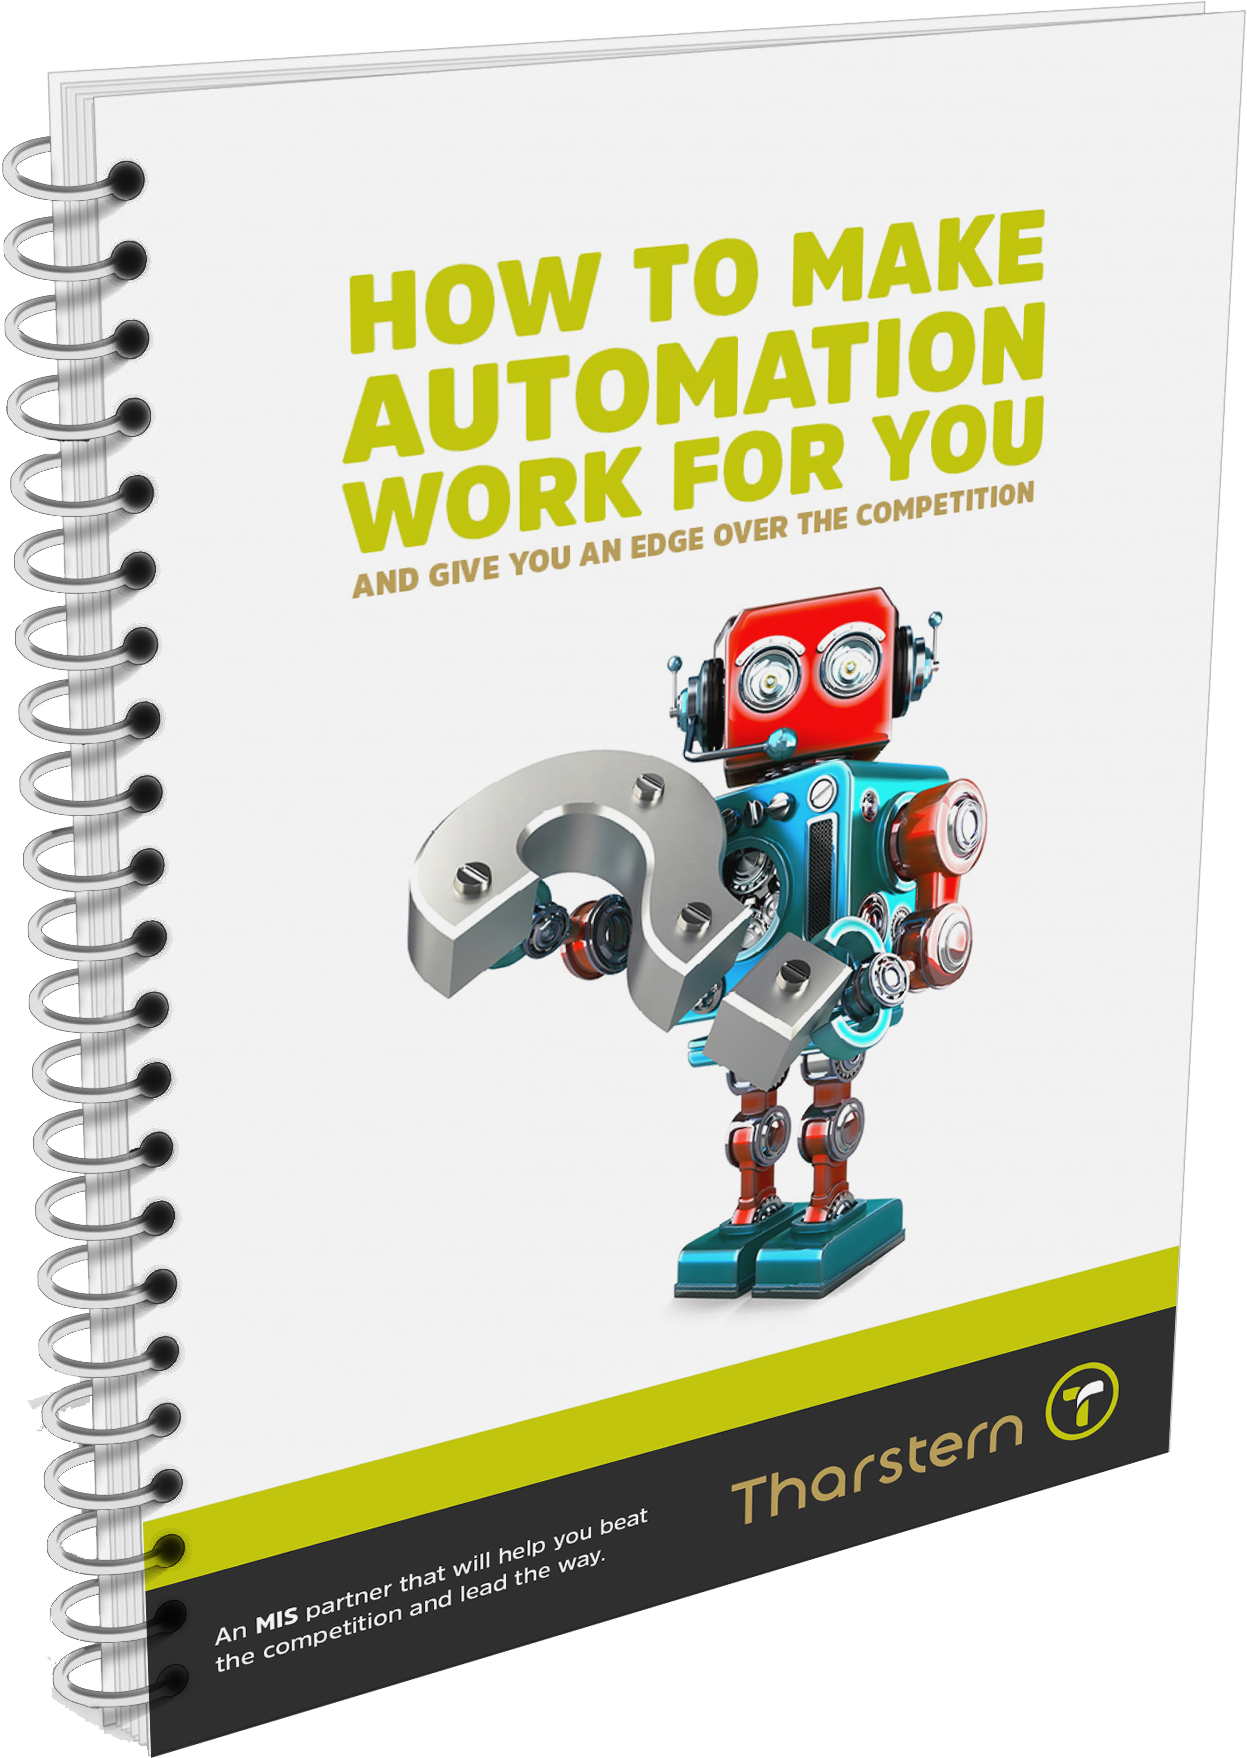 How to Make Automation Work for You